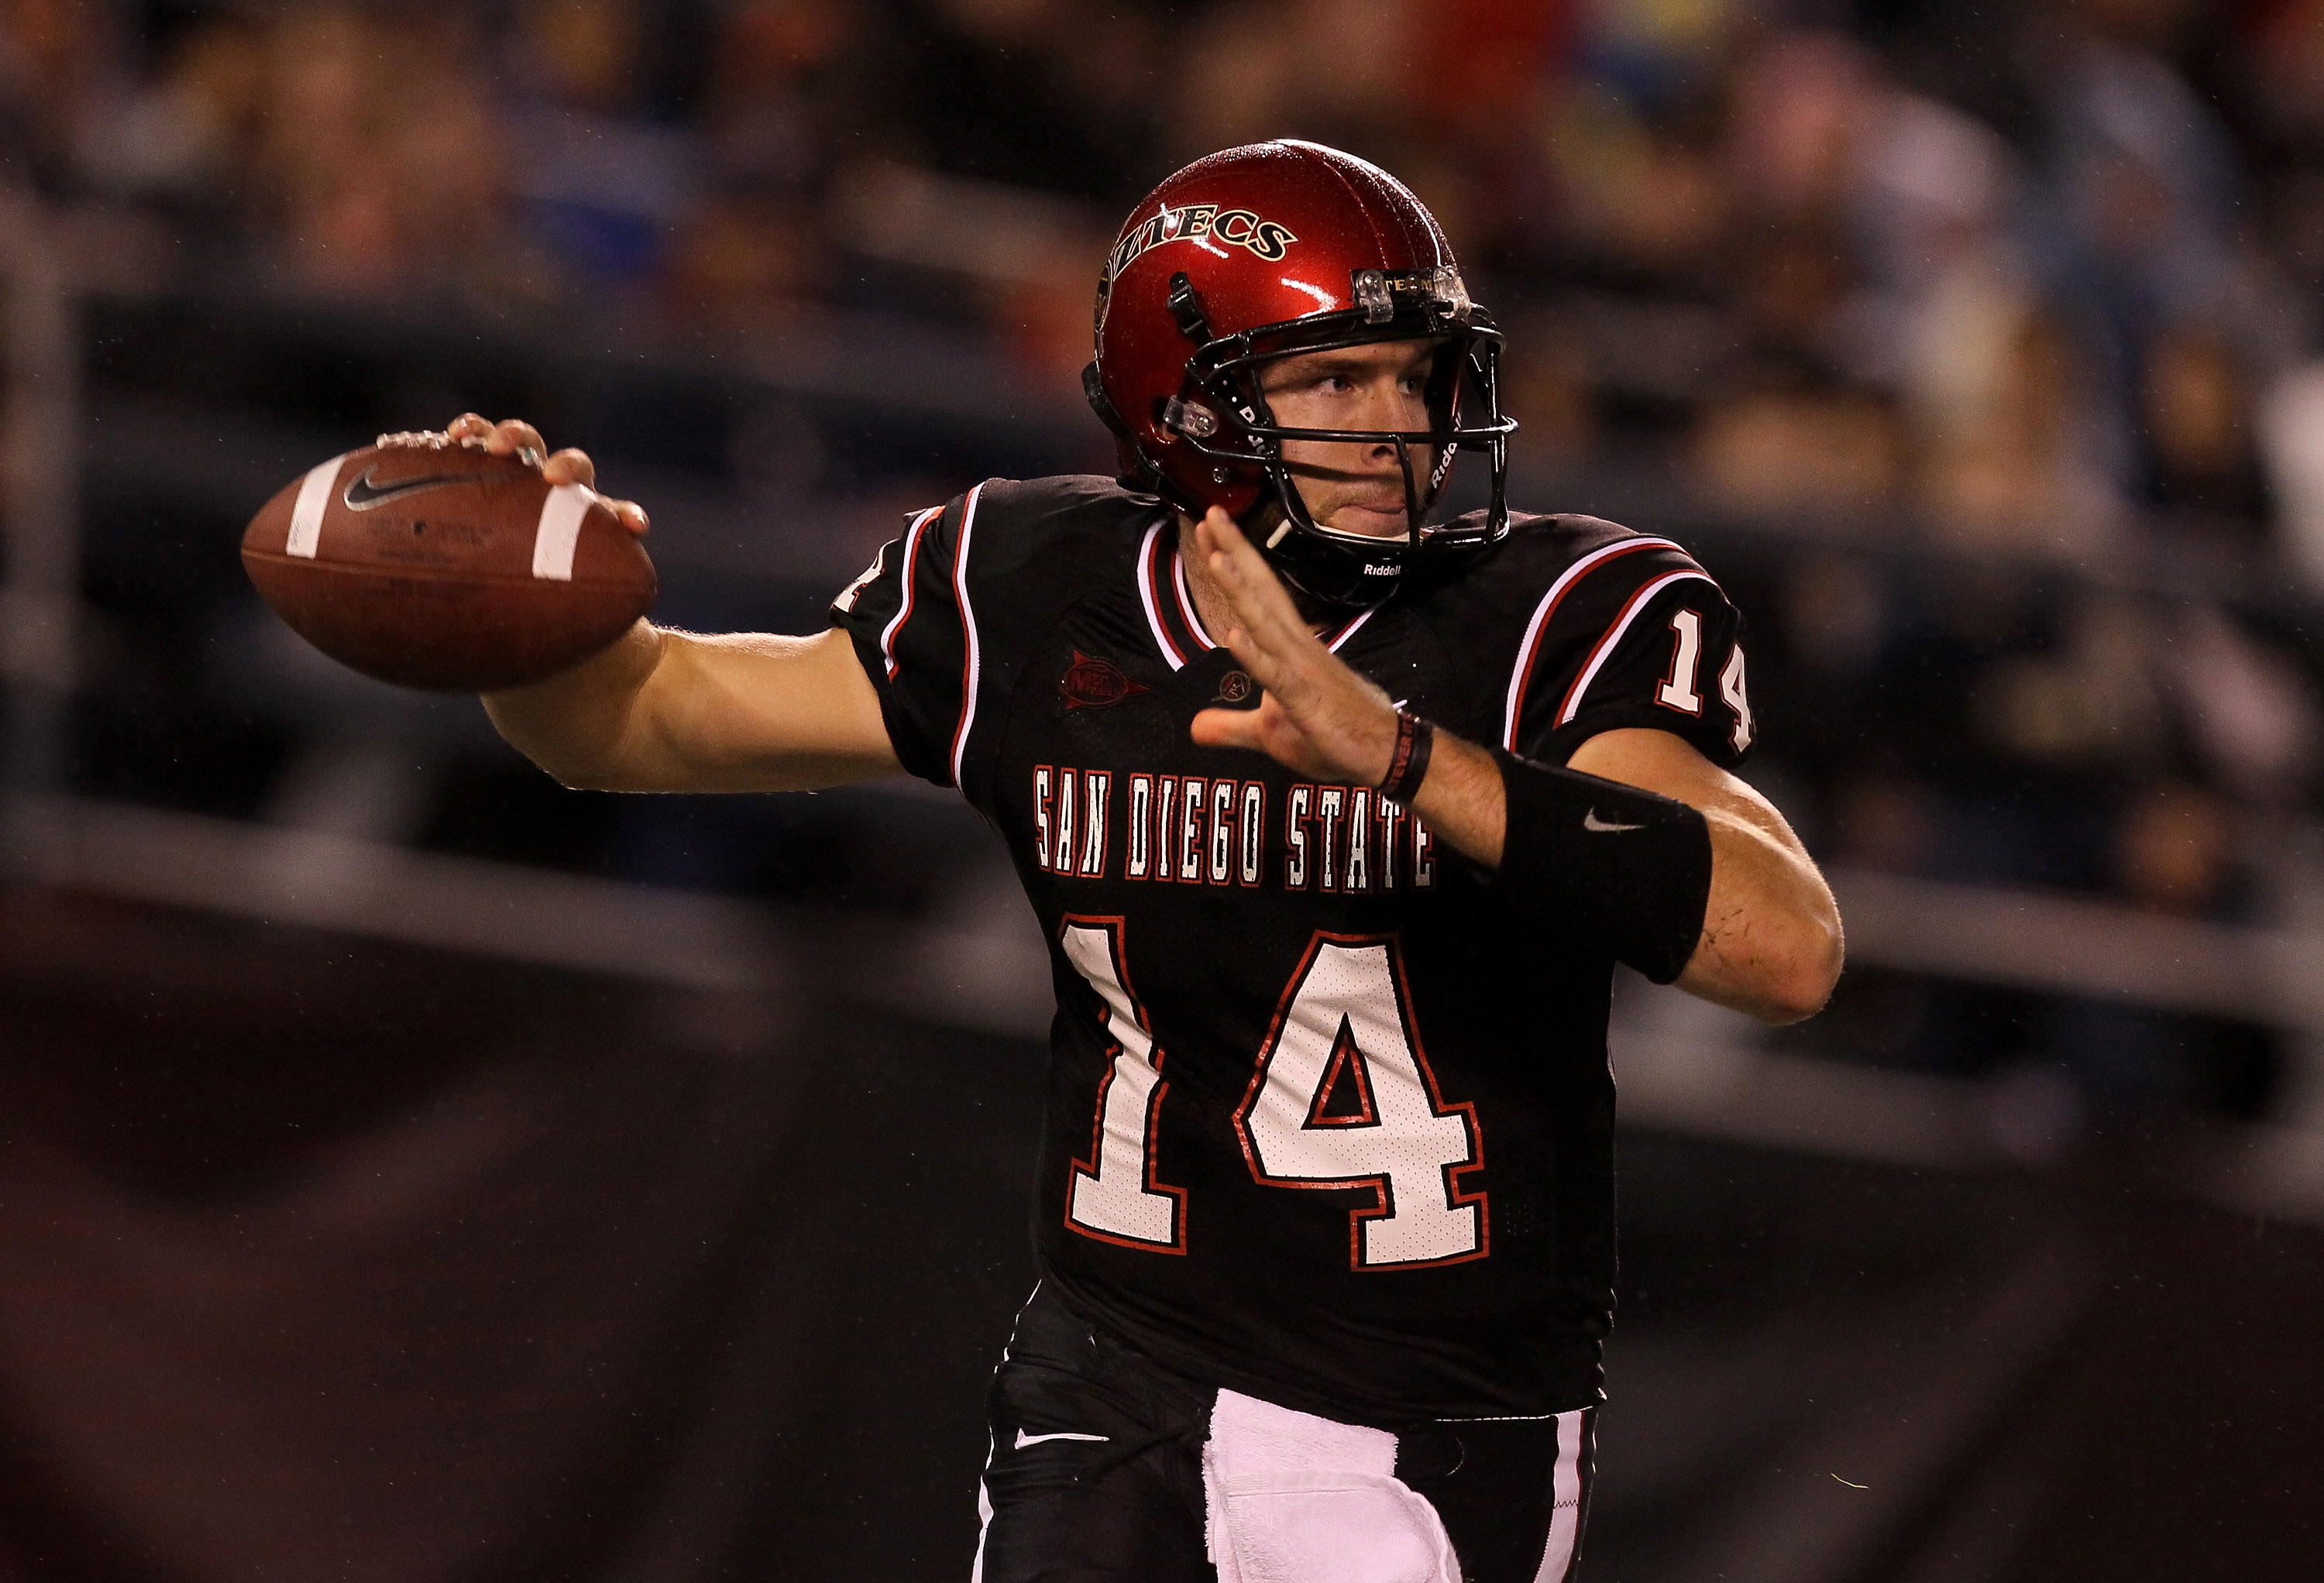 SAN DIEGO - NOVEMBER 20:  Quarterback Ryan Lindley #14 of the San Diego State Aztecs throws a pass against the Utah Utes at Qualcomm Stadium on November 20, 2010 in San Diego, California.  Utah won 38-34.  (Photo by Stephen Dunn/Getty Images)